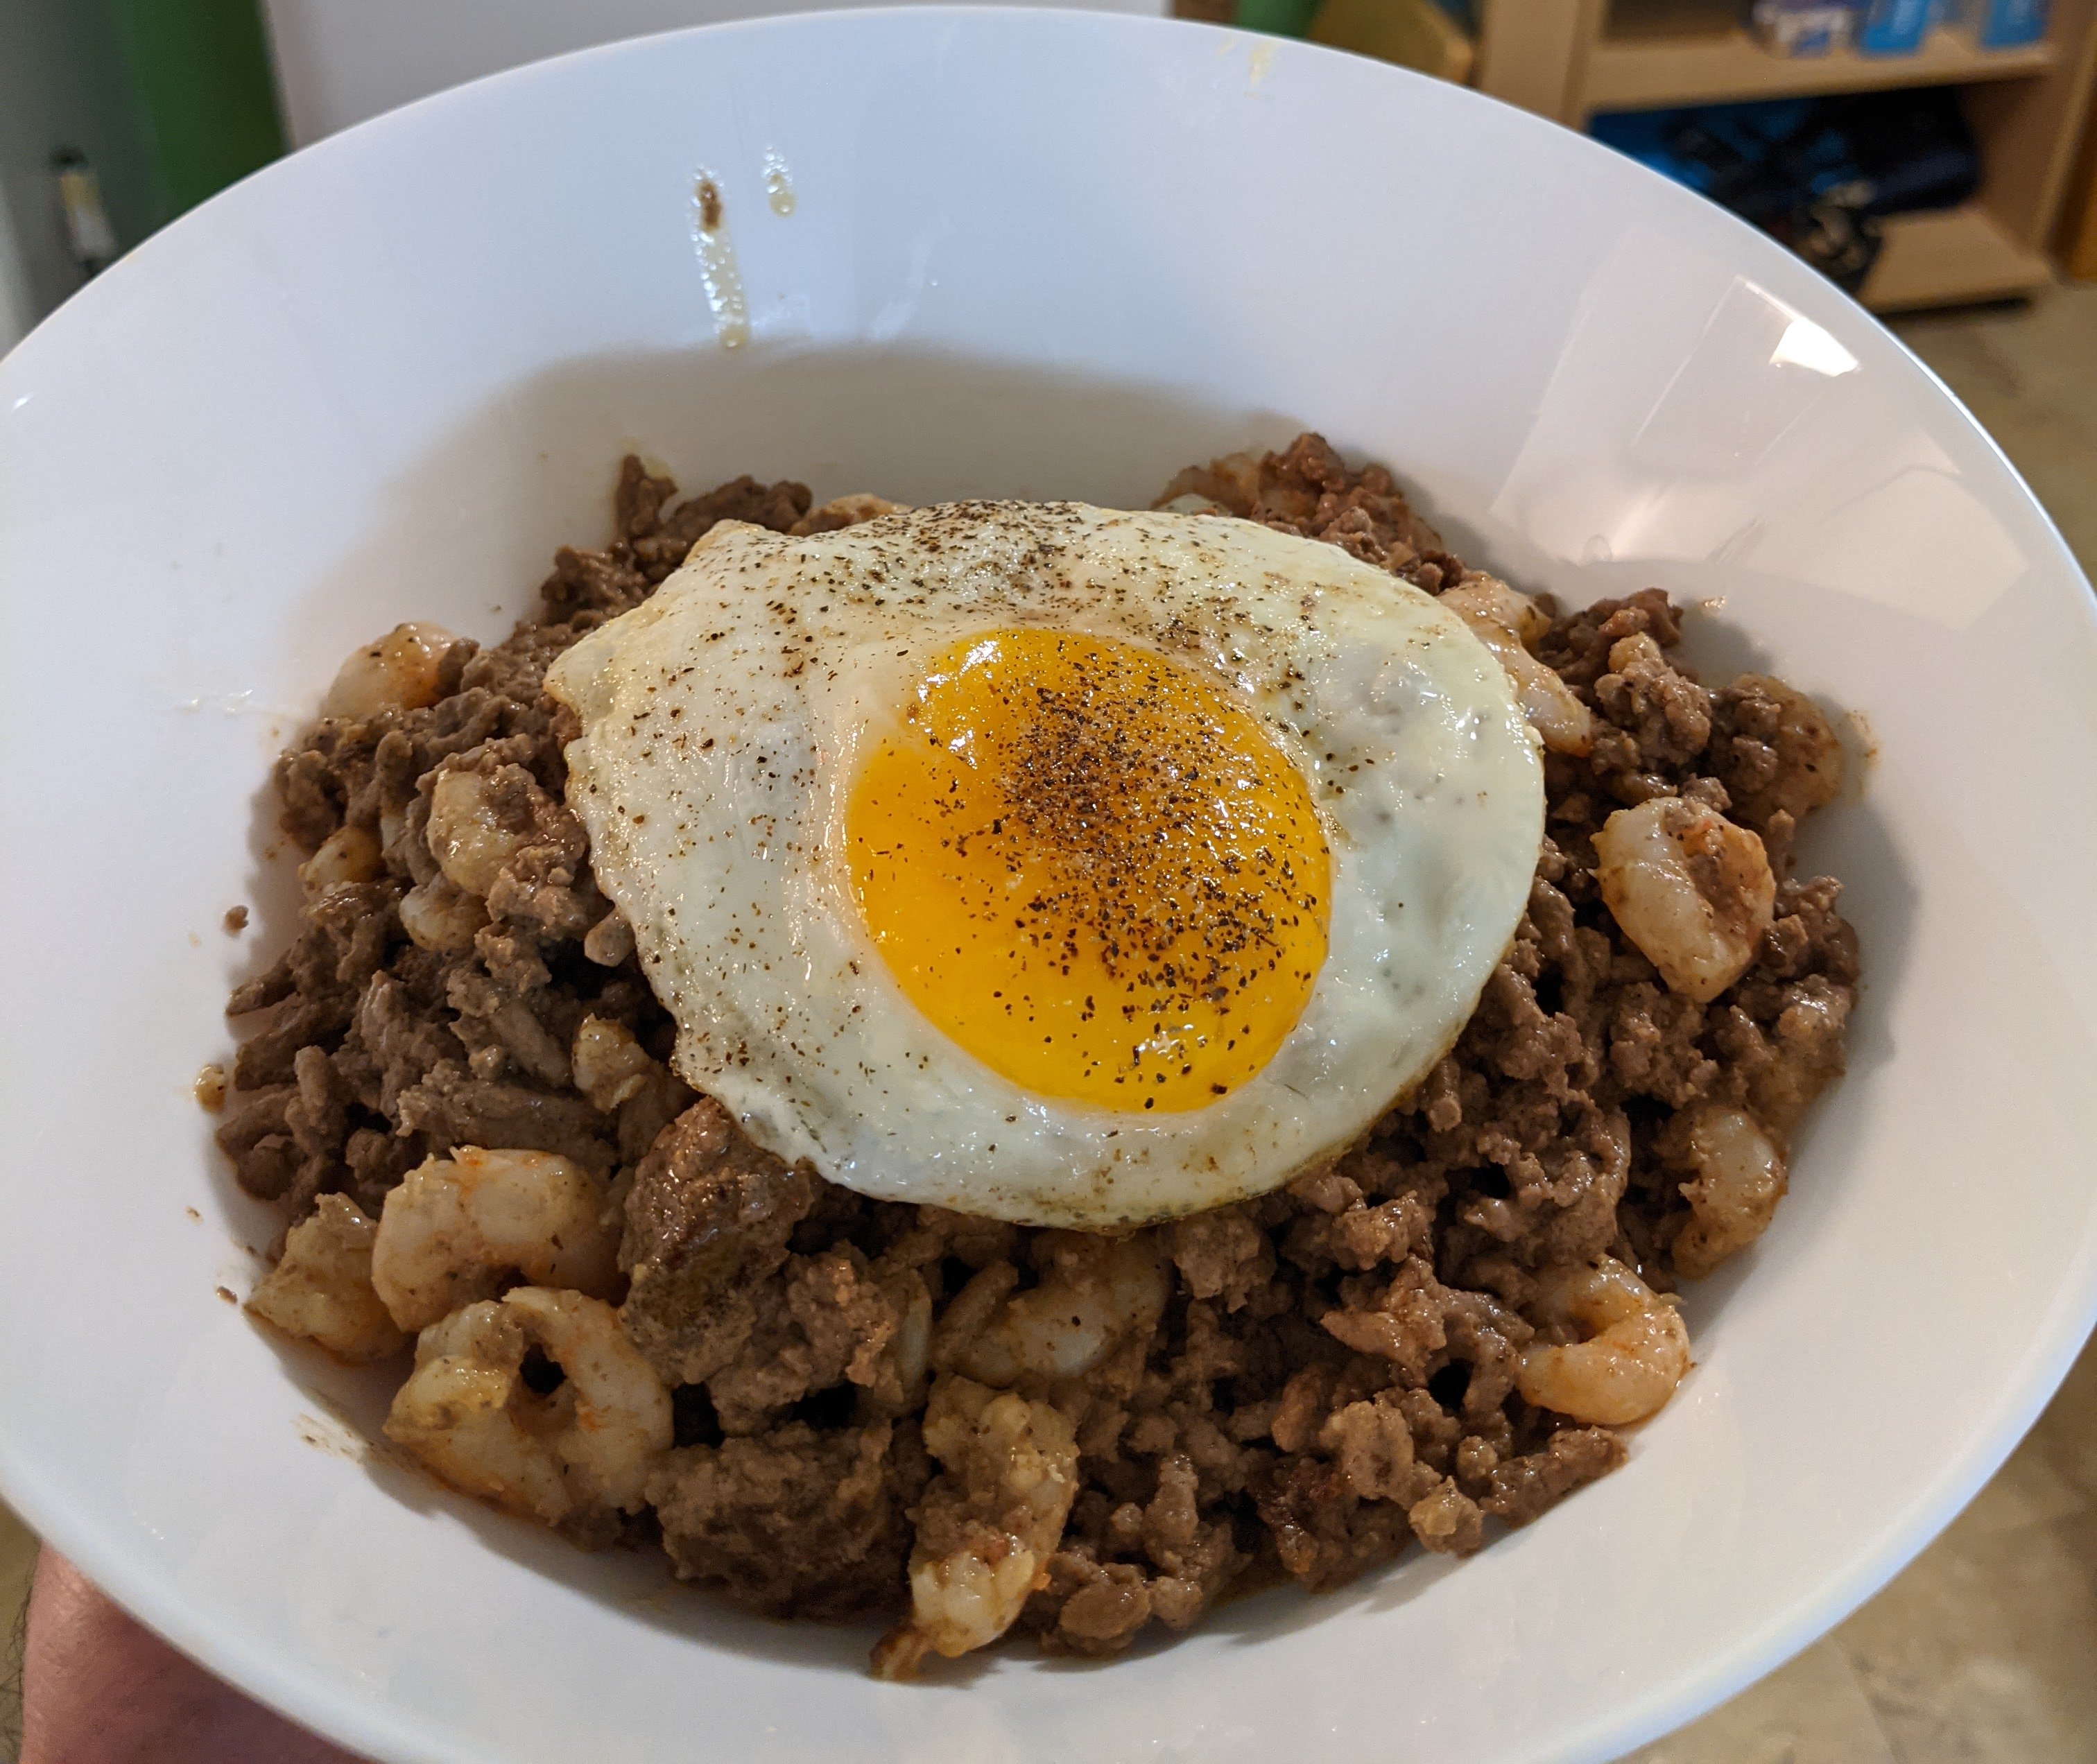 /nix/store/25l37gmlh0bgdr0d46q56nny2wc3sxgq-68yk5s262819h0dgf62qrqfsb90b51zy-source/Ref/Carnivore diet/Recipes/ground-meat-cereal-egg.jpg